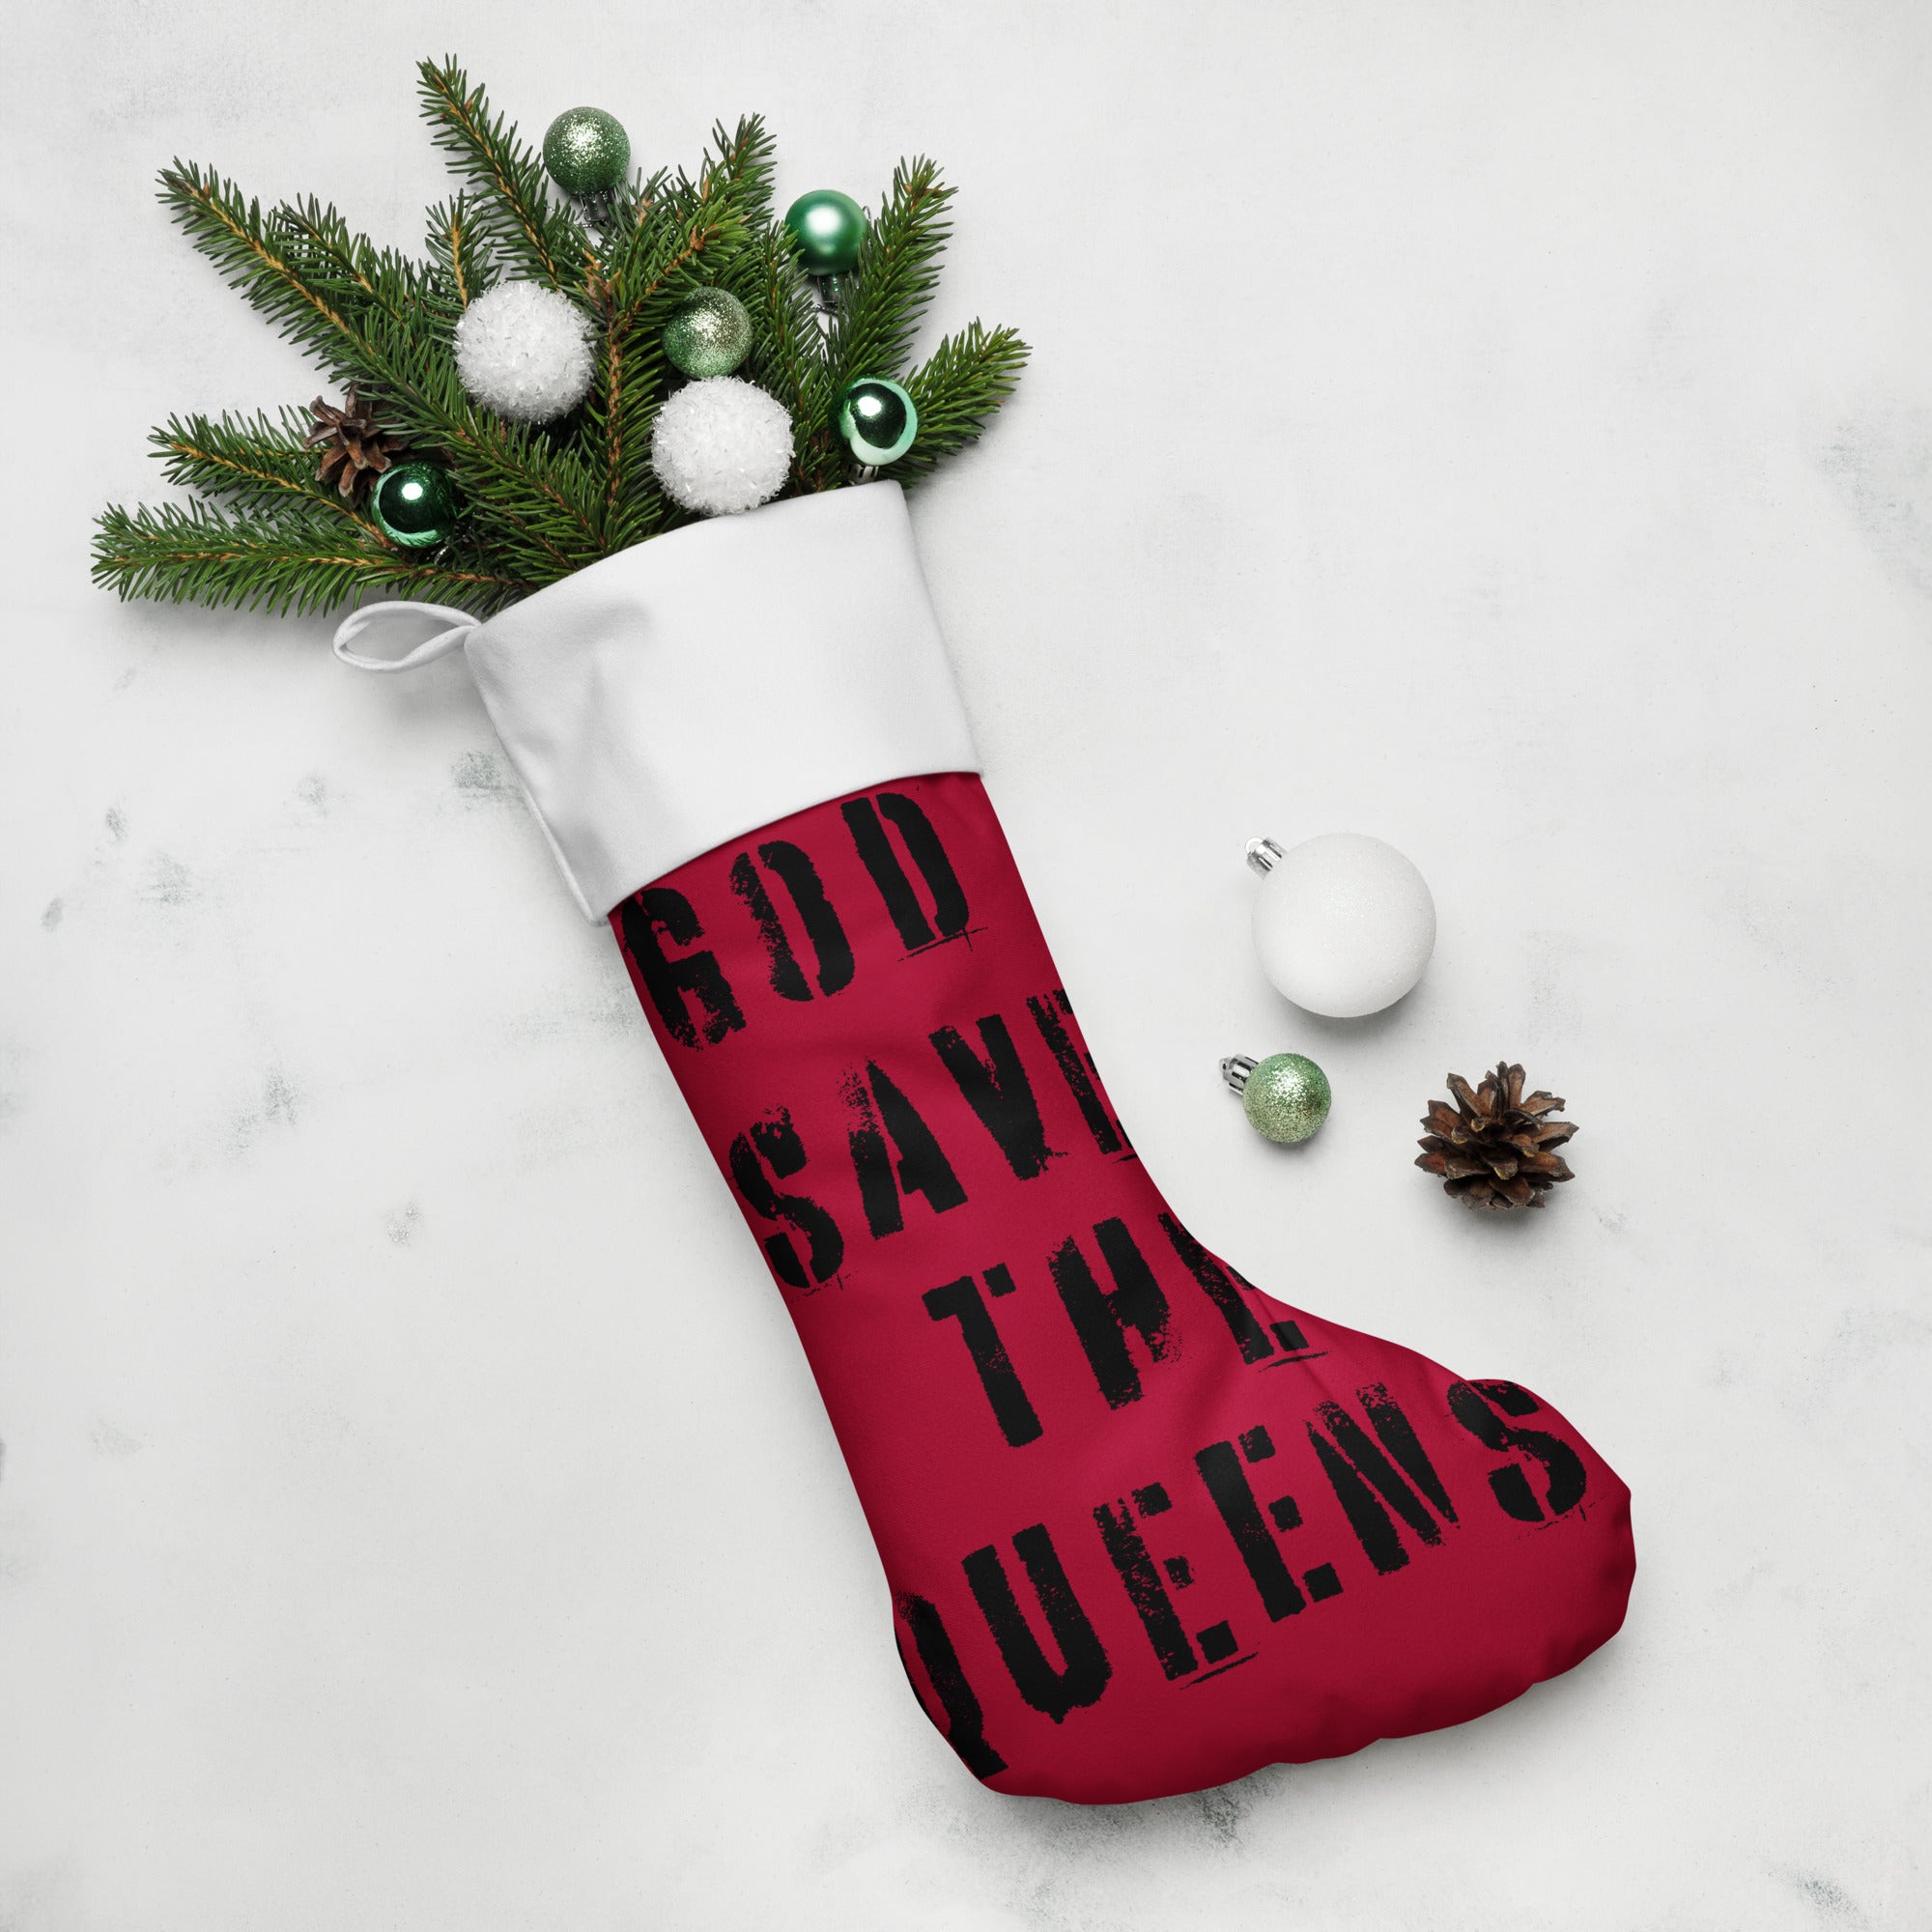 God Save the Queens Royal stocking design 02